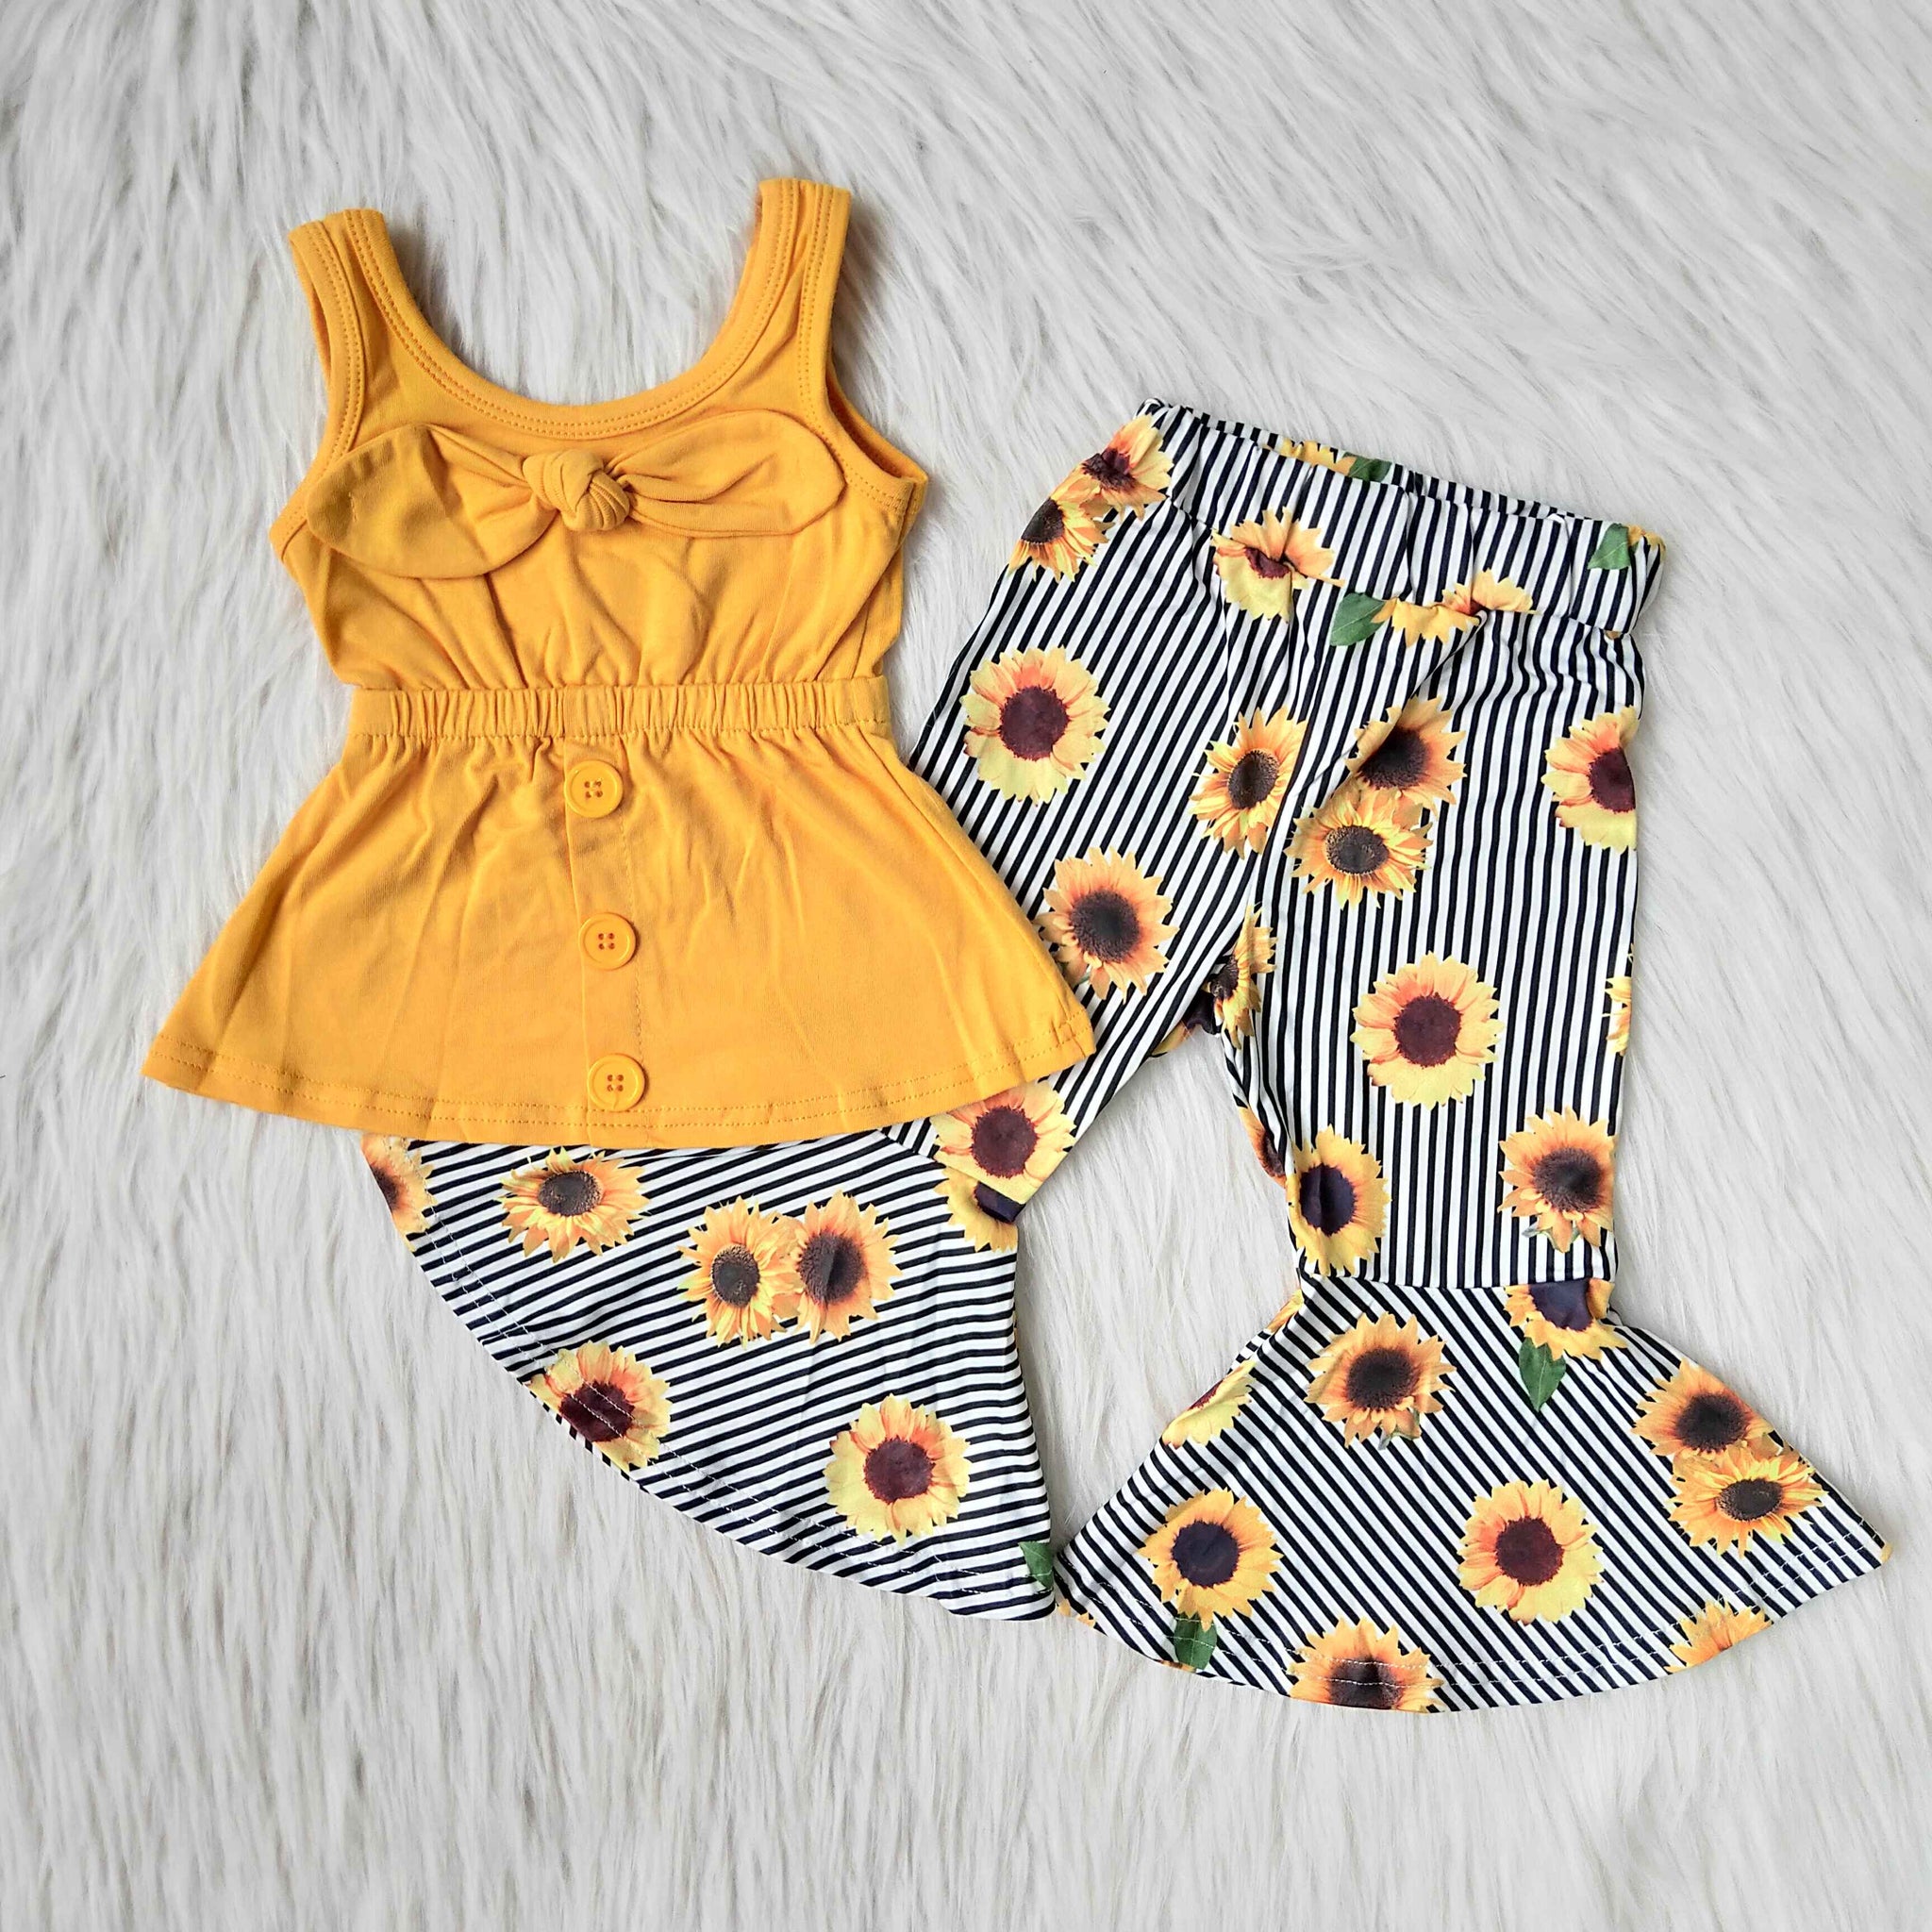 C16-4 girl clothing yellow bow sunflower fall spring set